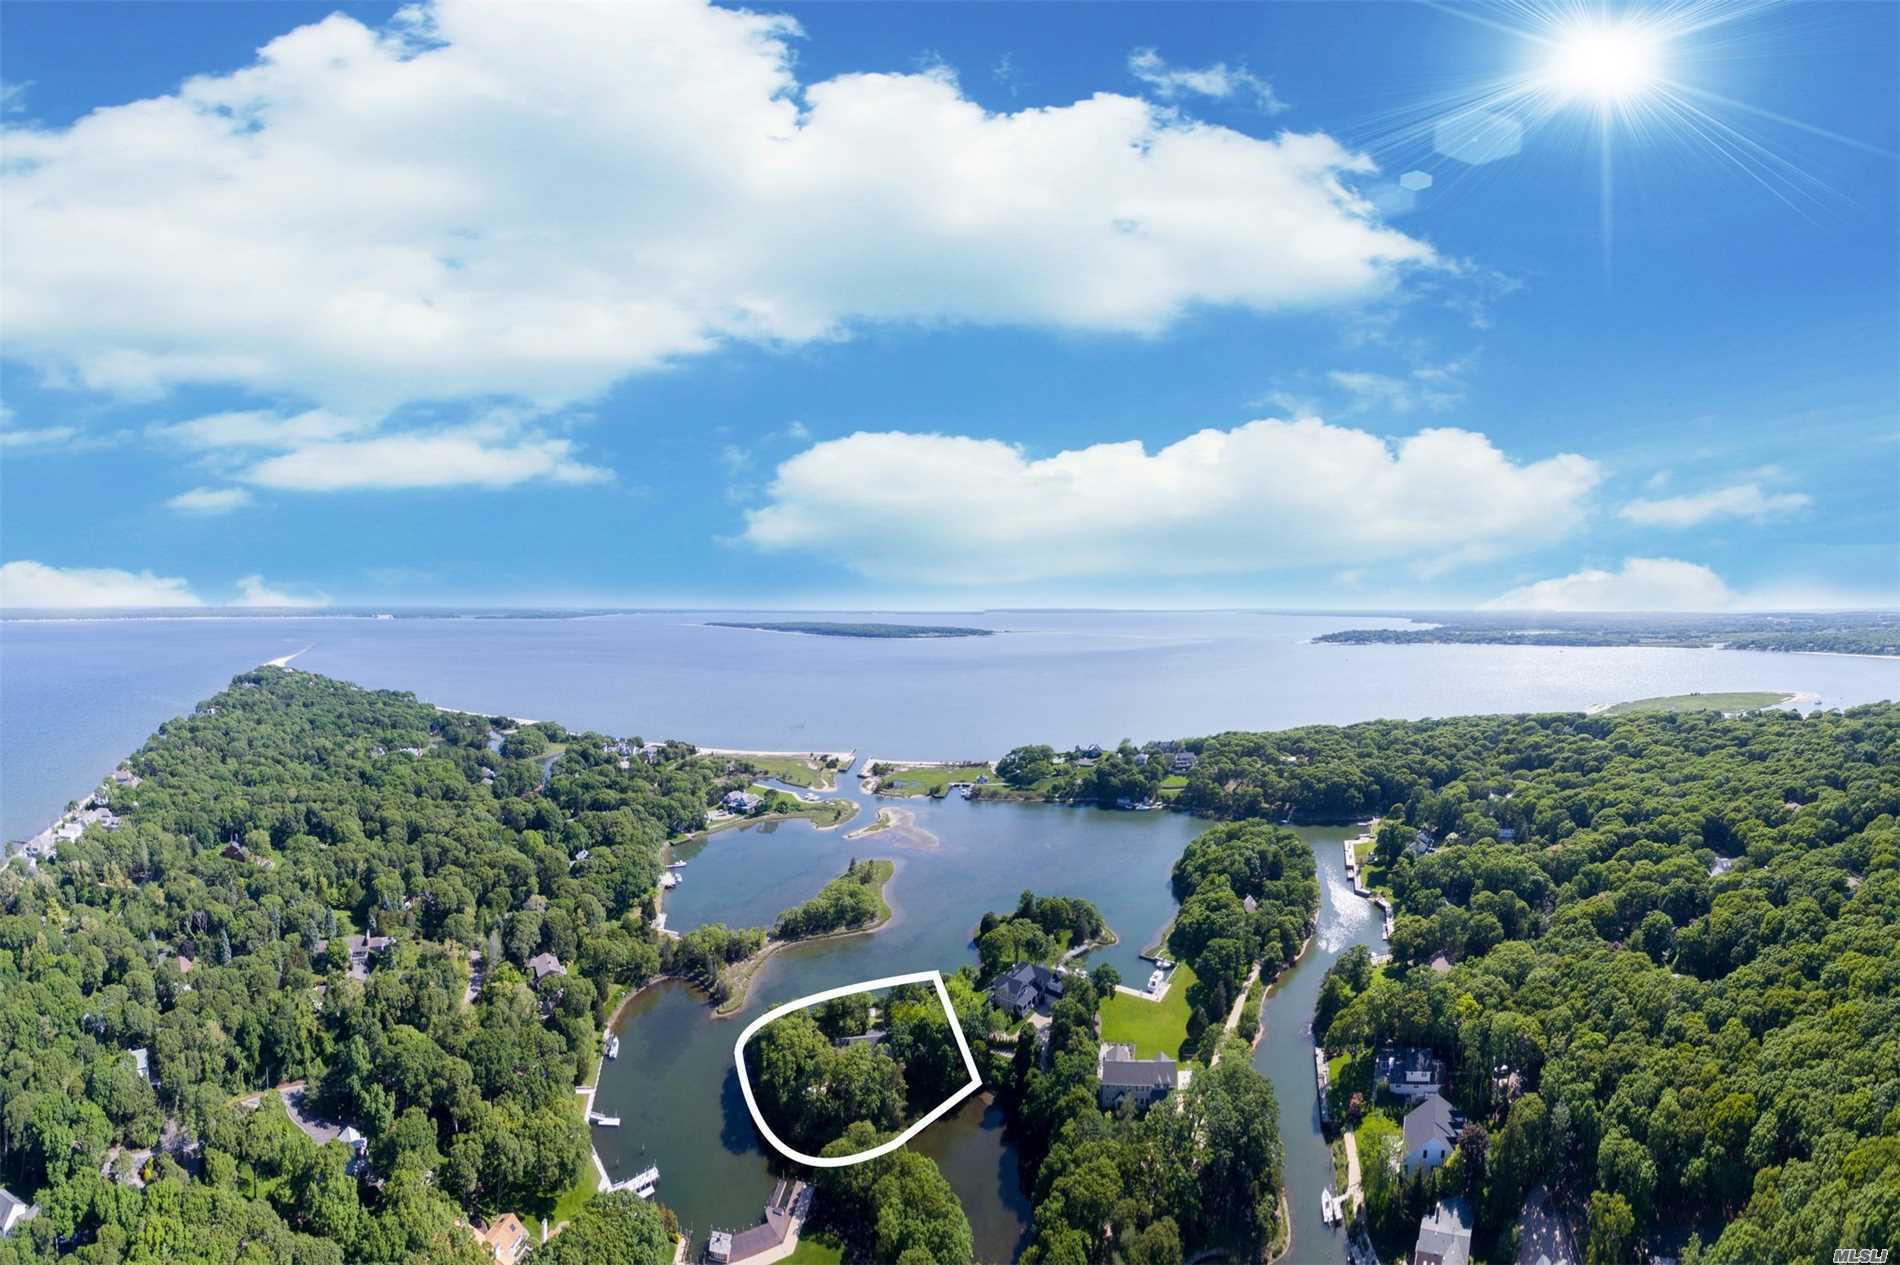 Private Peninsula On Nassau Point, 645Ft. Of Protected Waterfront On Wunneweta Pond With A Deeded Dock And Big Views Of Great Peconic Bay And Robins Island. Sprawling 3-Bed, 2.5-Bath Mid-Century Ranch. X-Large Living Room, Sun Room With Brick Floors, And Two Wbf. An Incredible Piece Of Property Ready For A Reno Or Rebuild, Surrounded By Multi Million Dollar Compounds.